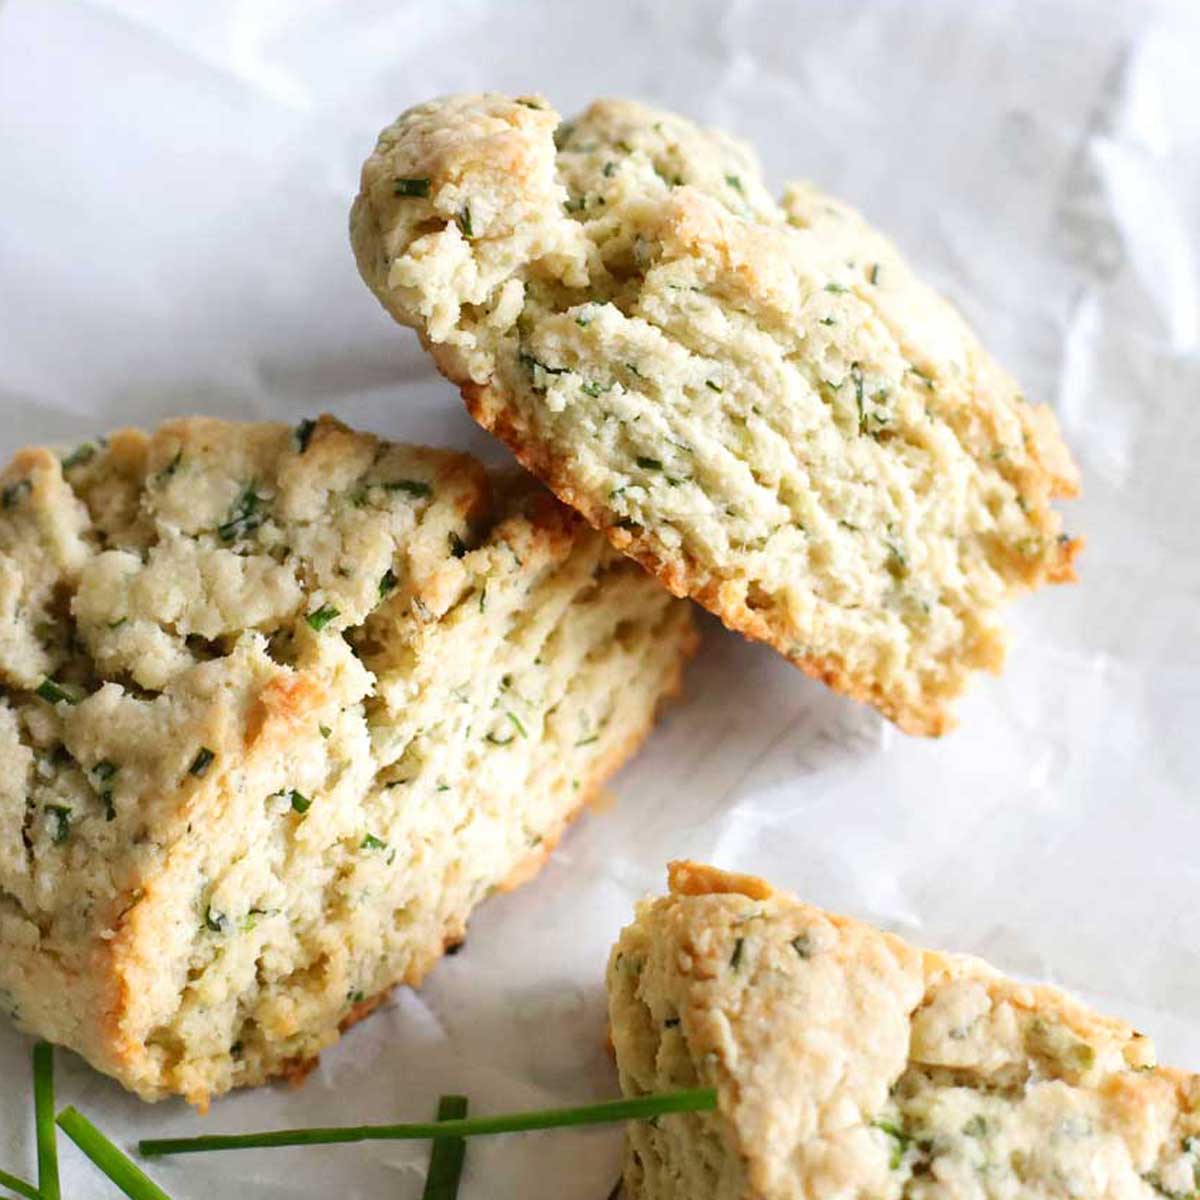 Savory and Delicious! Potato & Chives Scones (No Butter, Vegan Recipe) - Cauliflower Everything Bagel Scones